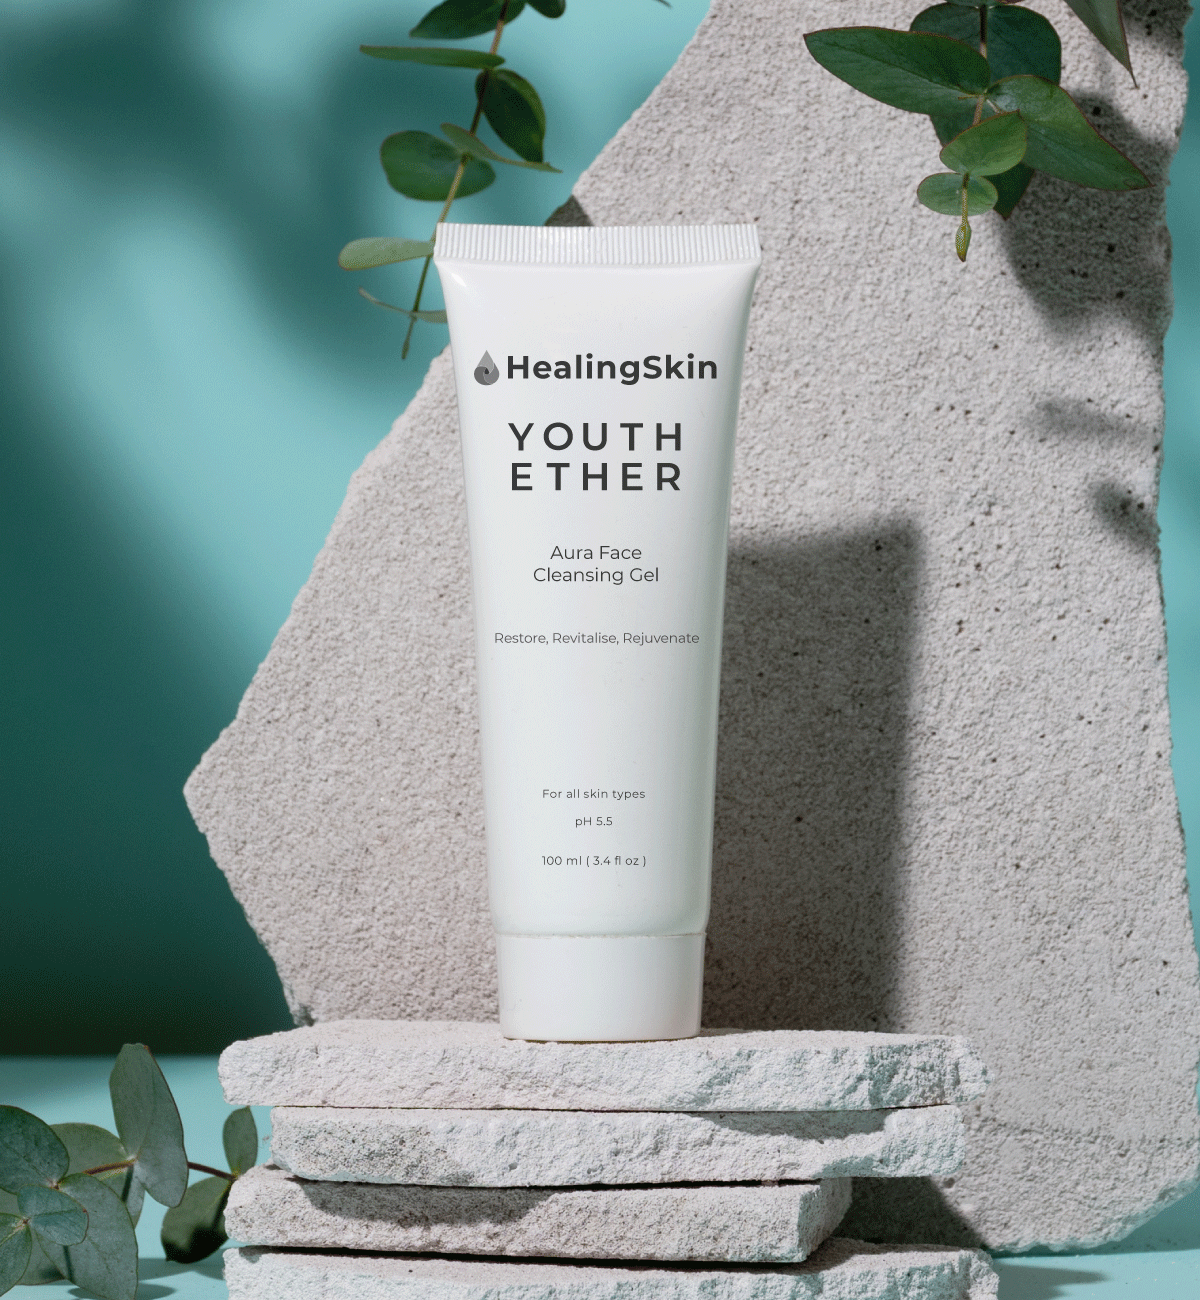 Youth Ether Cleansing Gel contains aurapeptides that restore, revitalise and rejuvenate your skin.